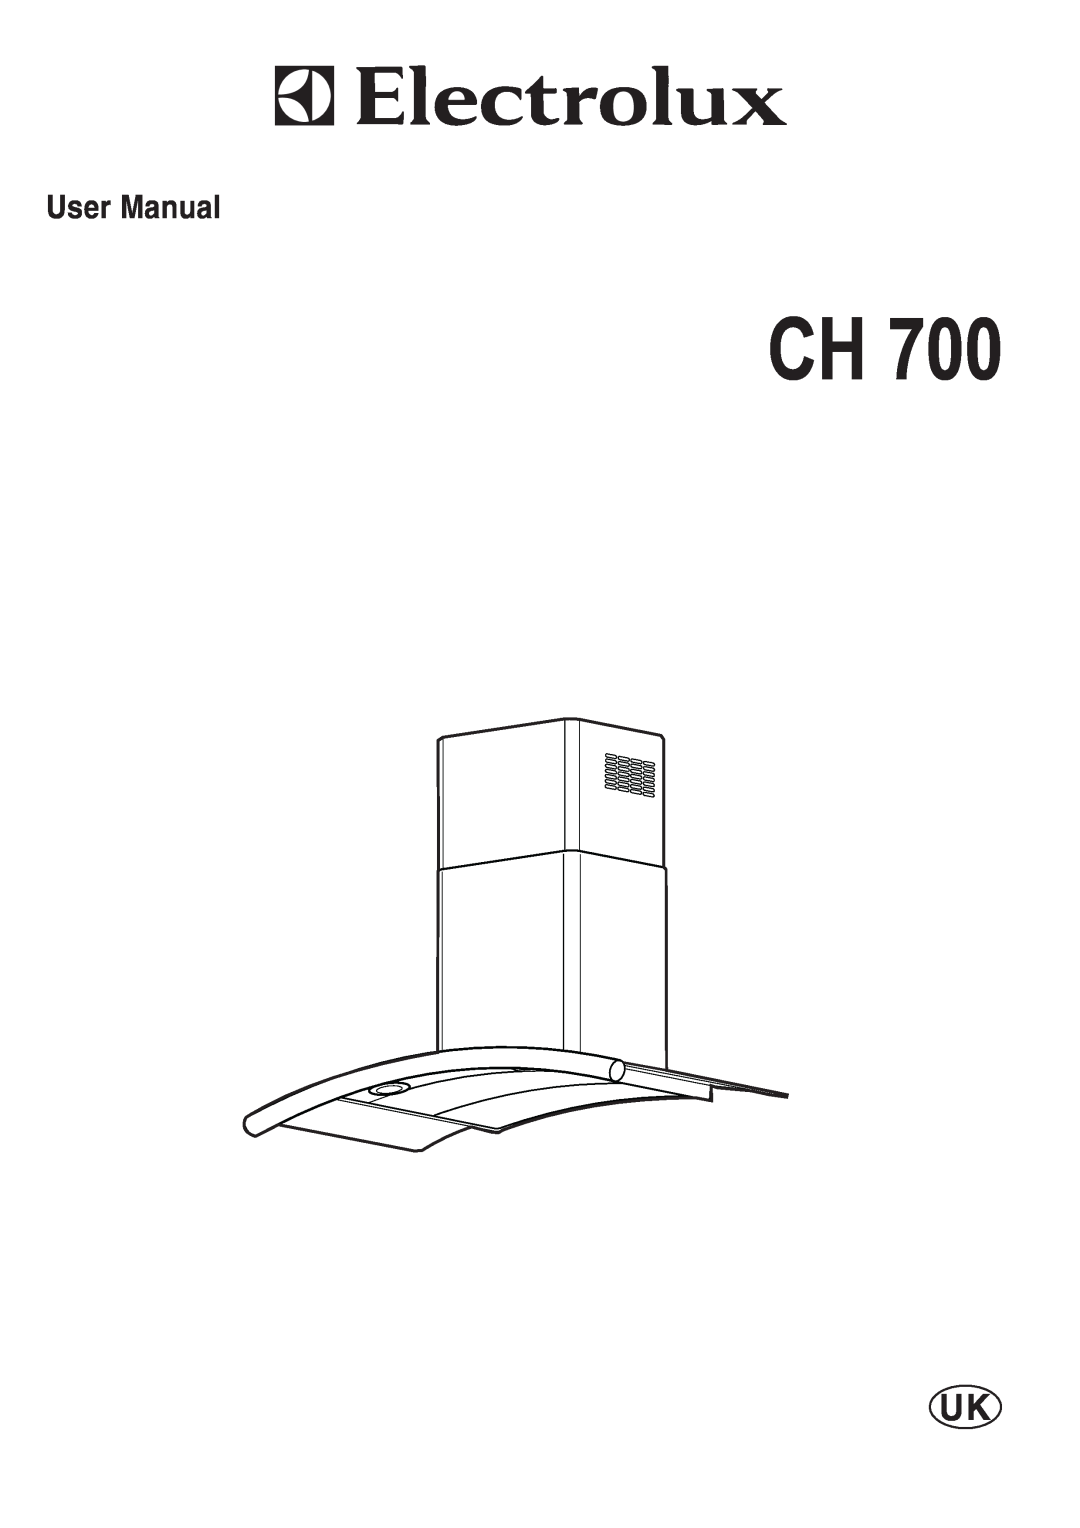 Electrolux CH 700 user manual 